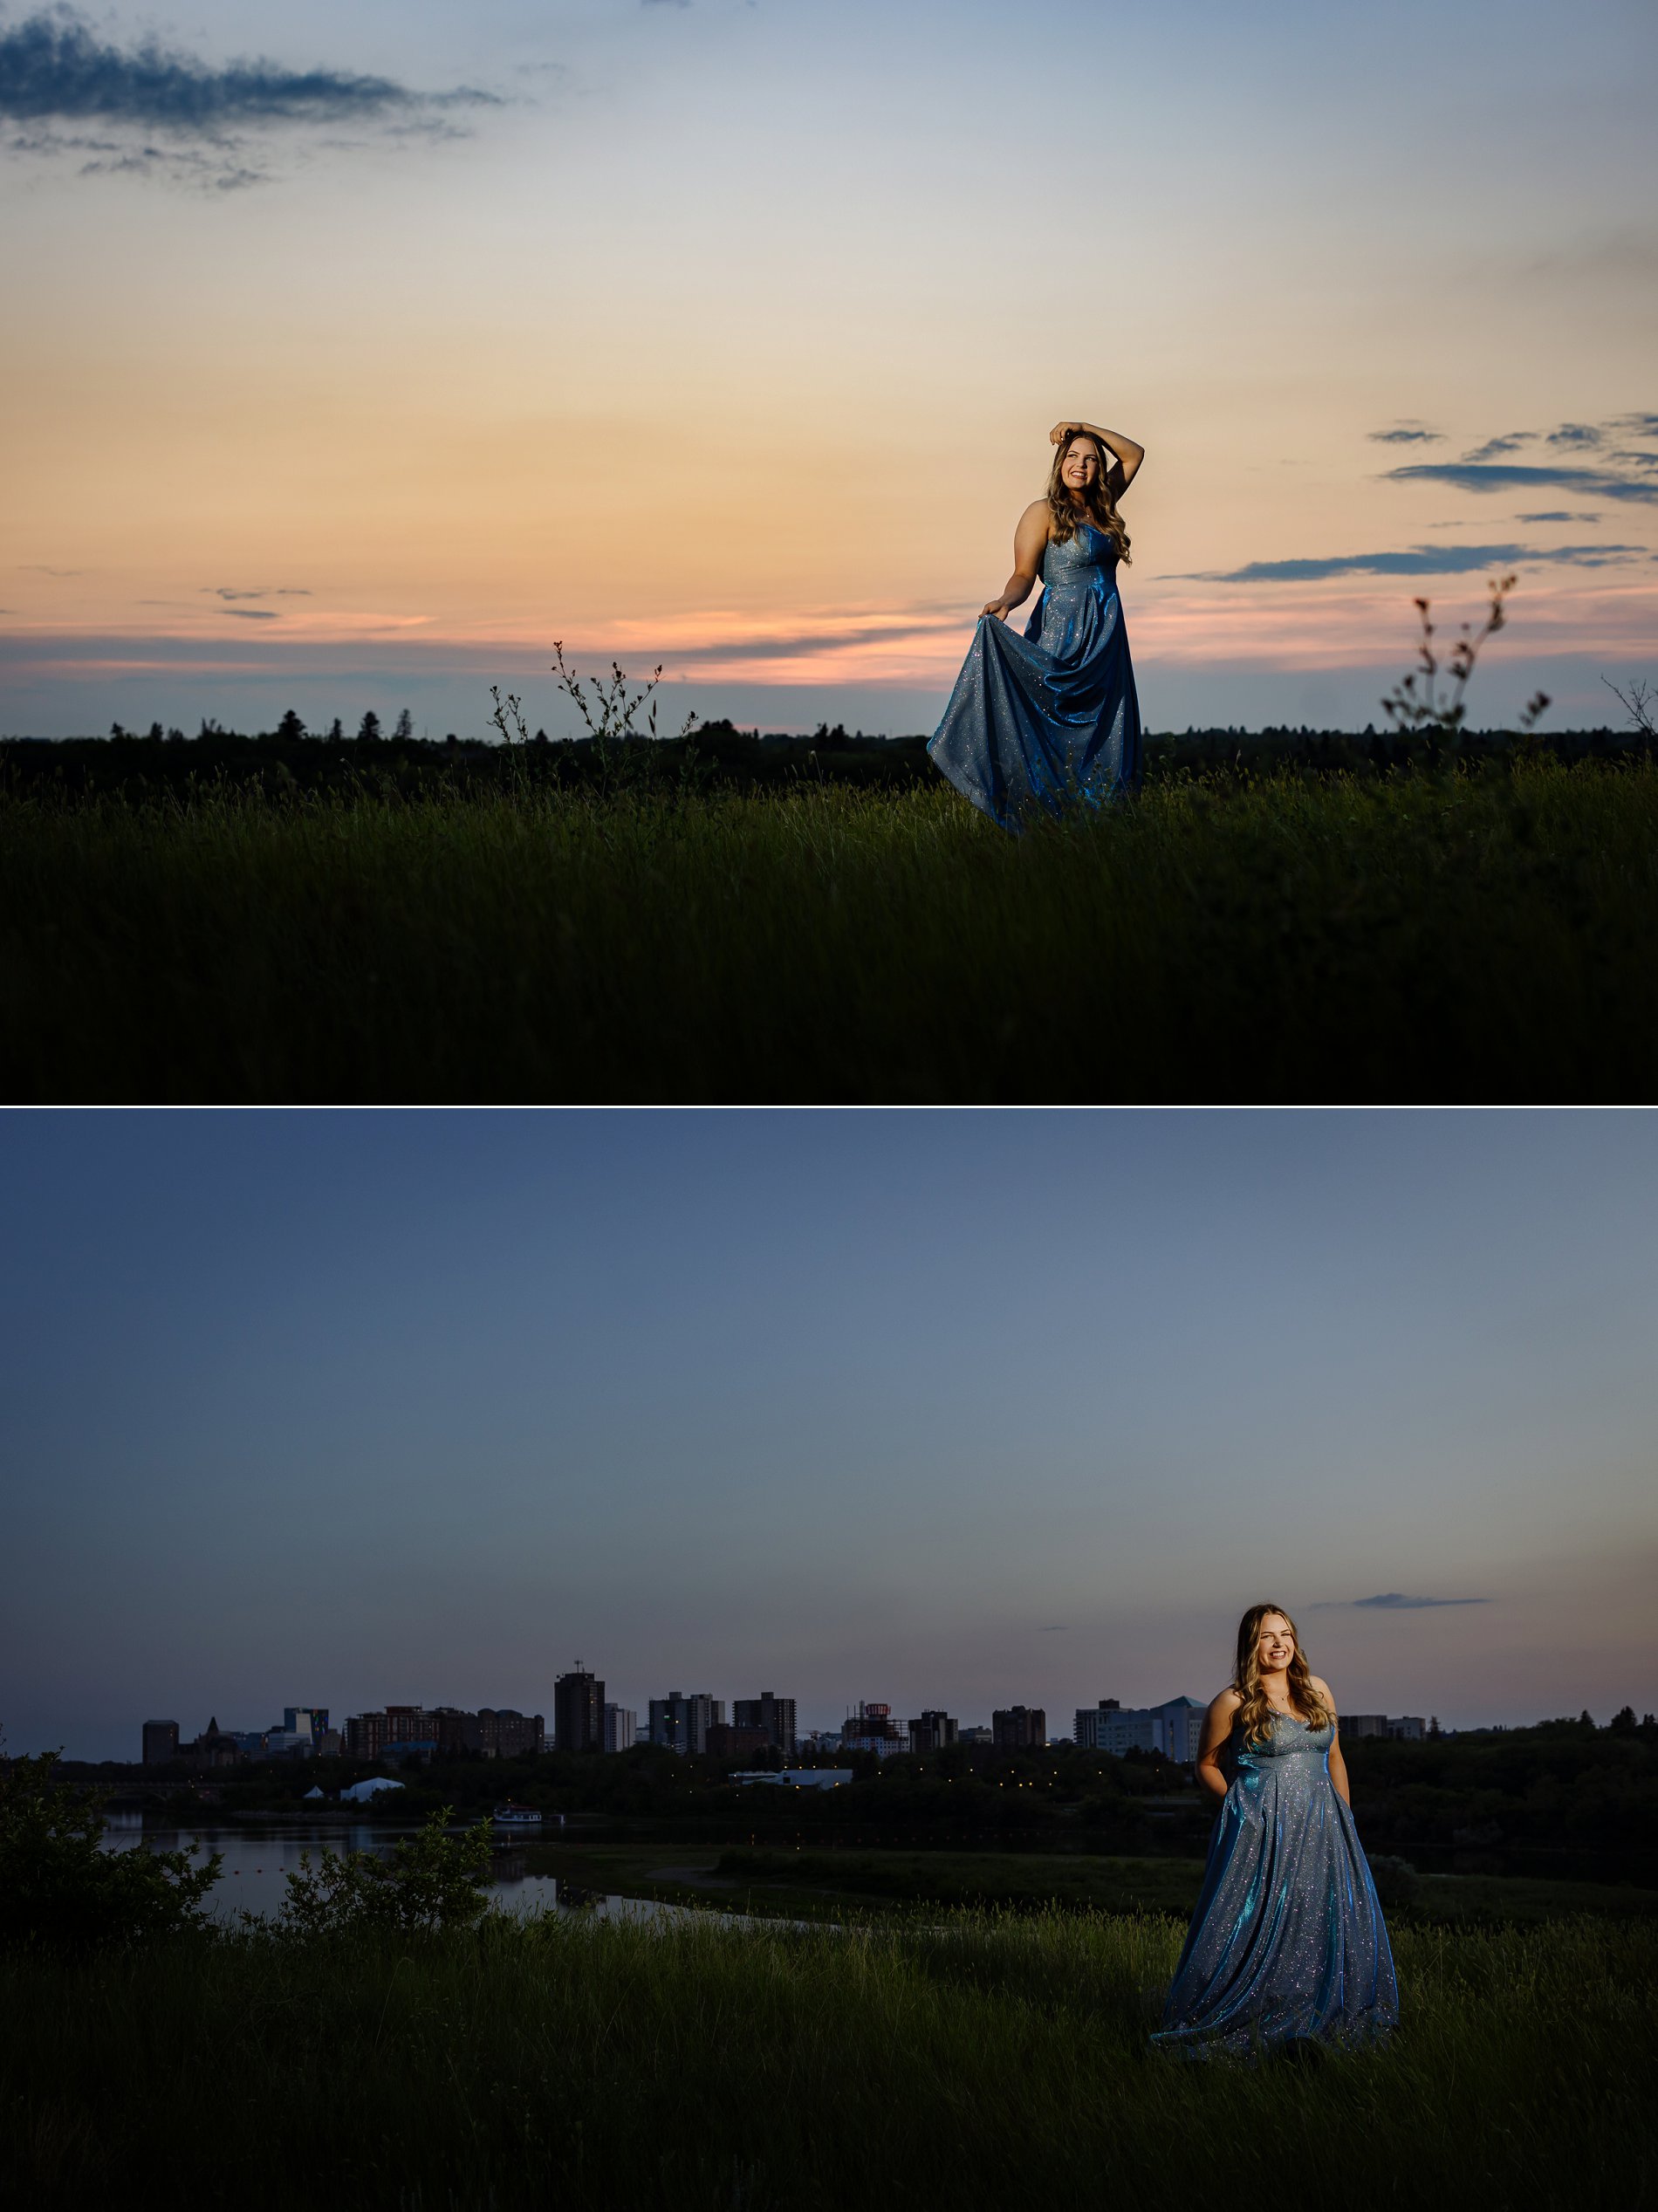 A high school grad stands on the riverbank in front of the Saskatoon skyline at sunset.